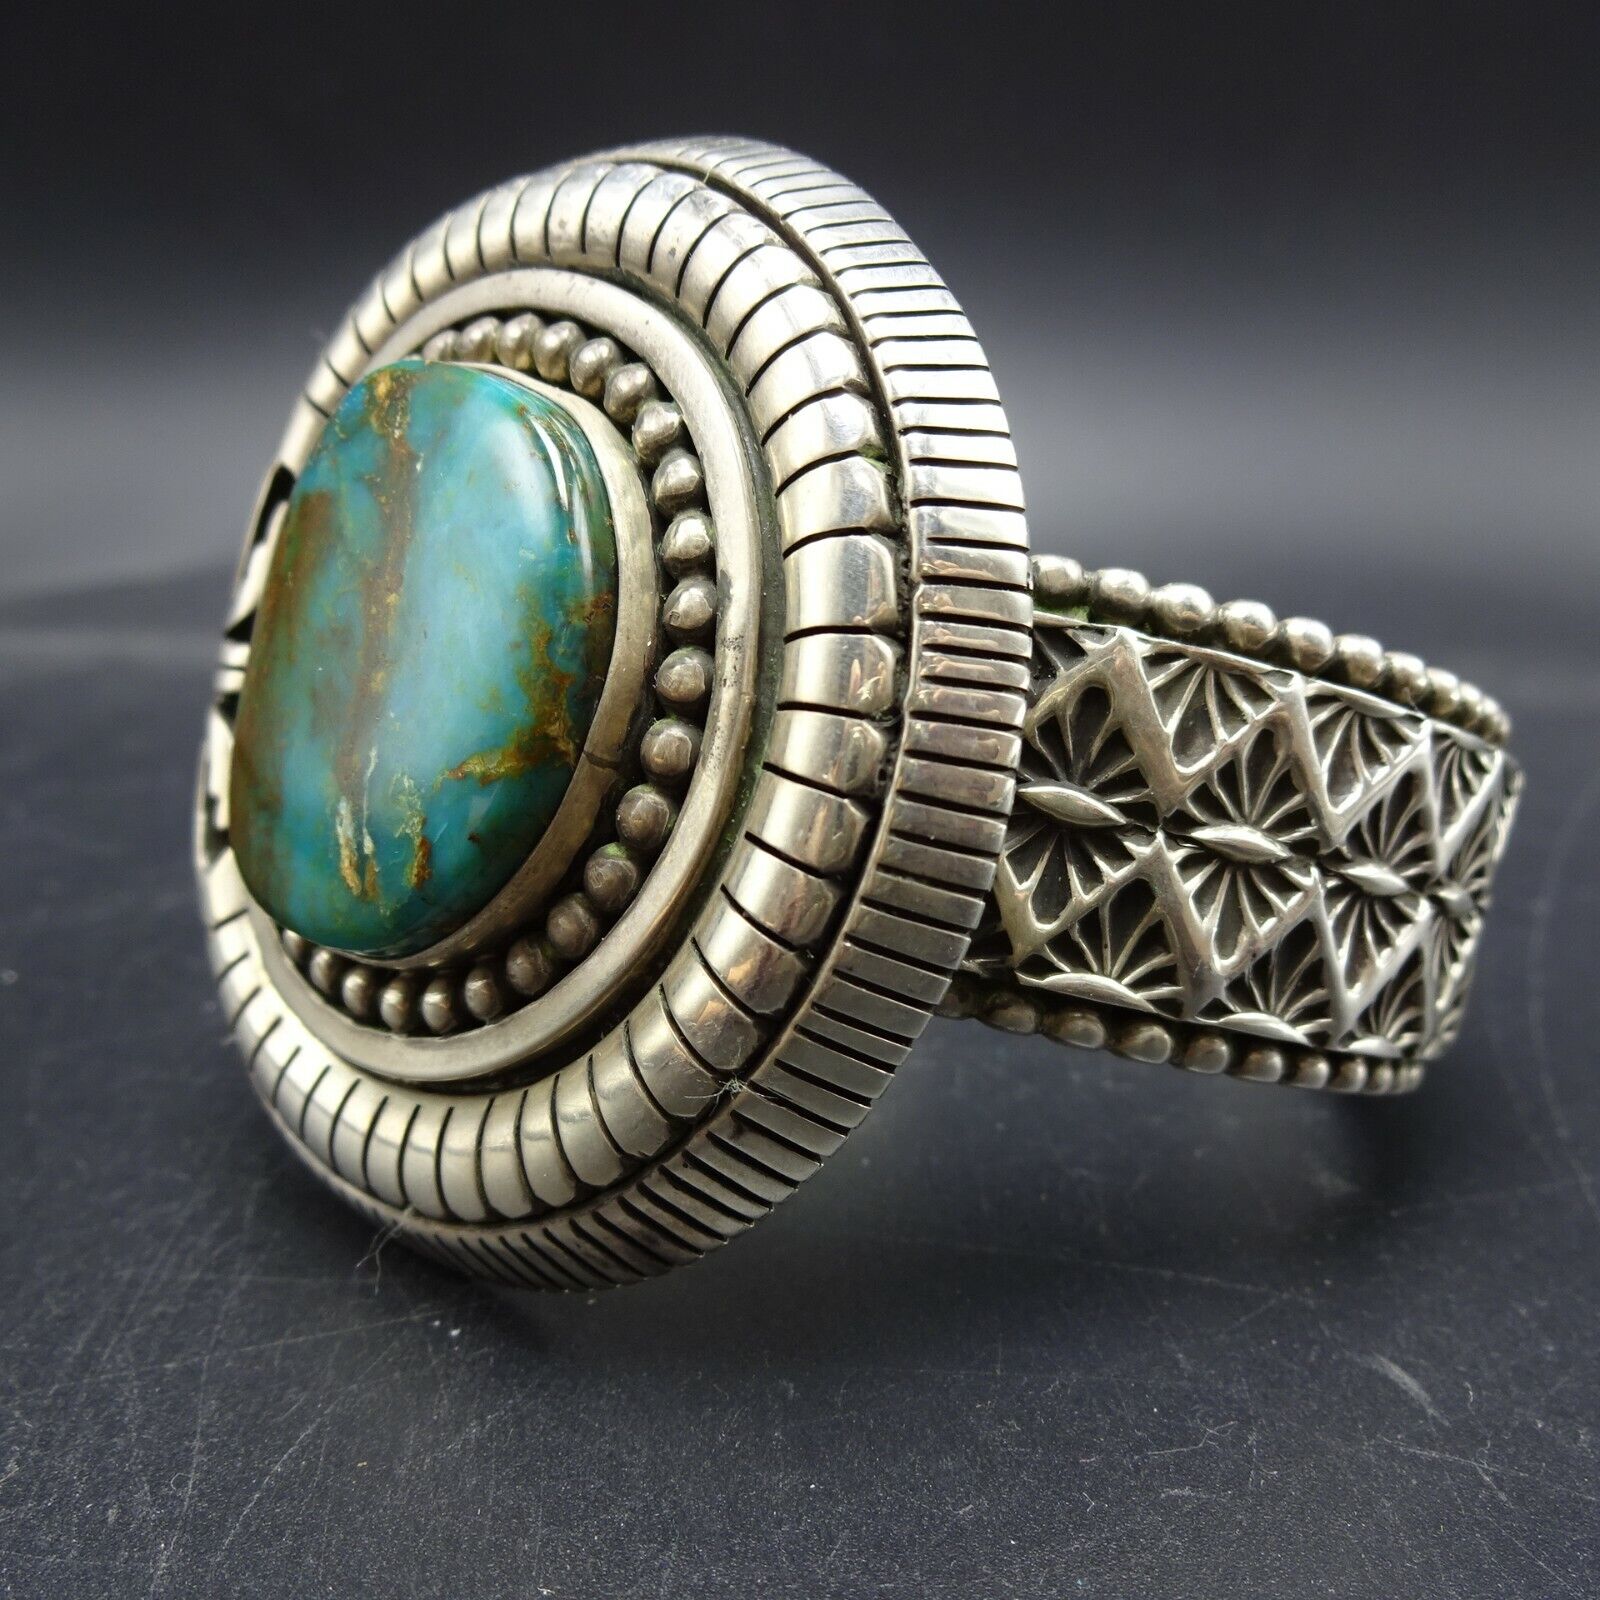 228.4g NAVAJO Heavy Gauge Hand-Stamped Sterling Silver TURQUOISE Cuff BRACELET